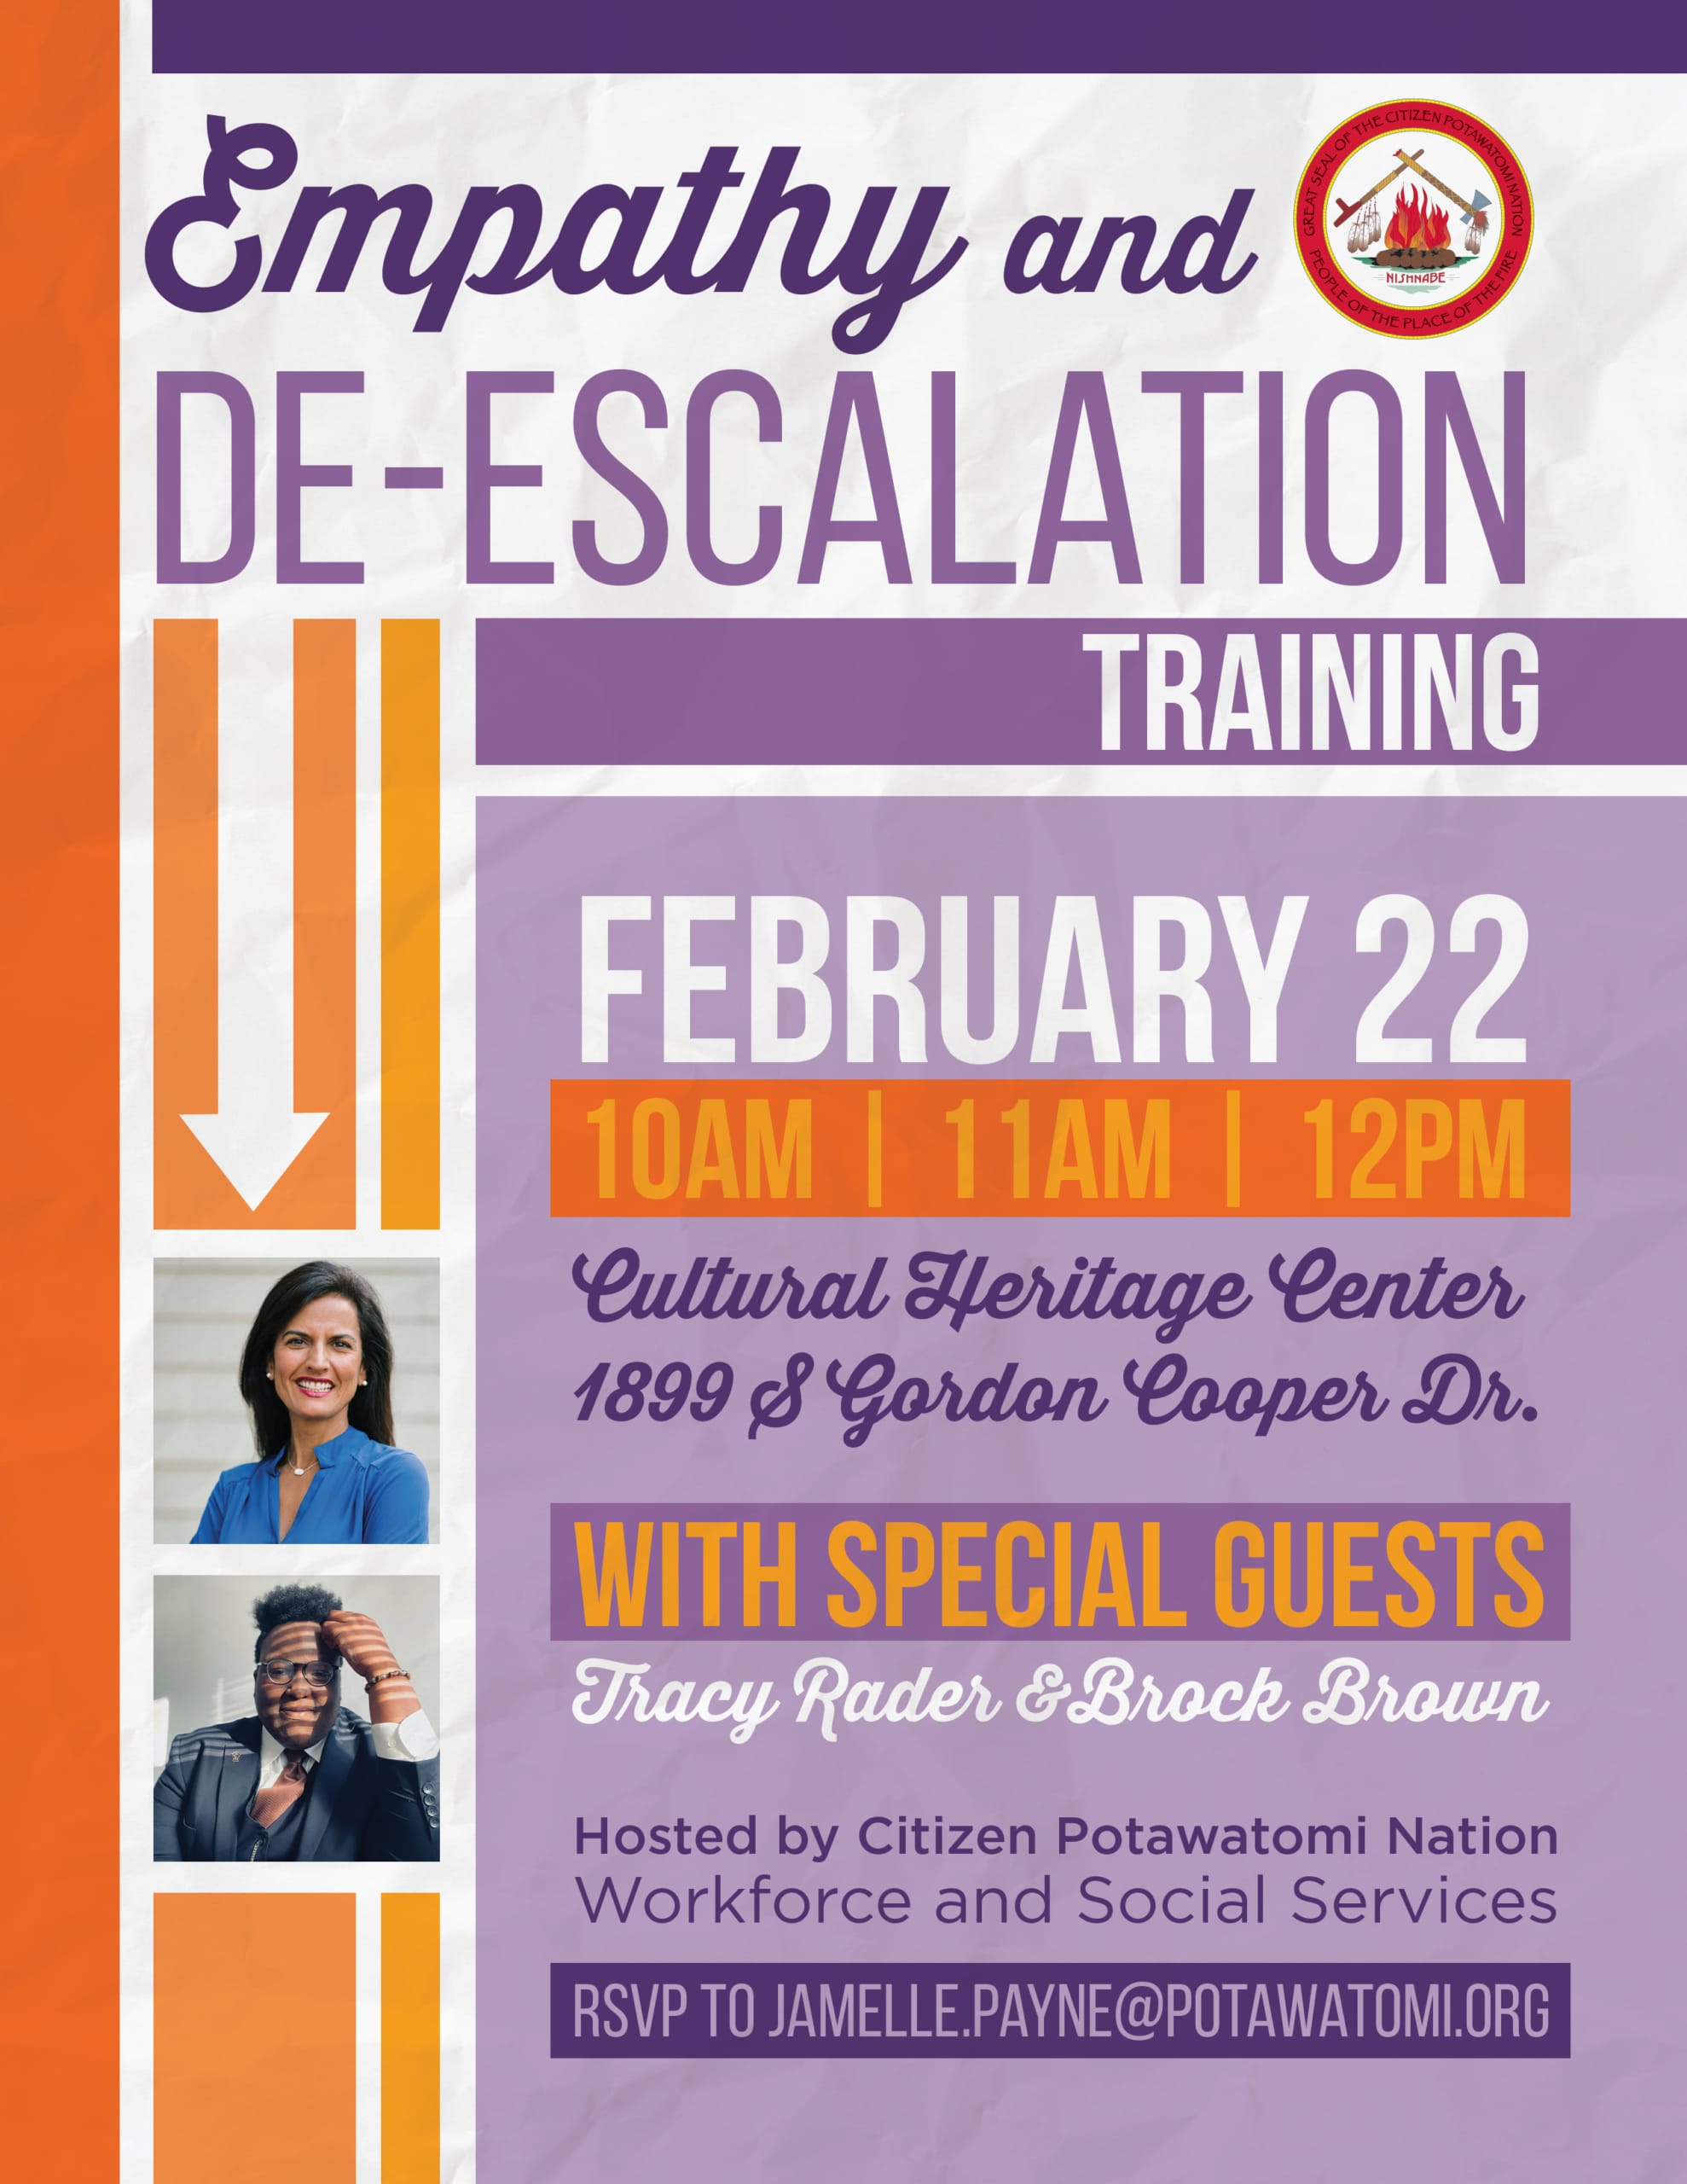 Purple and orange flyer advertising that CPN Workforce Development and Social Services will host empathy and de-escalation trainings on Wednesday, February 22, 2023, at the Cultural Heritage Center with special guests Tracy Rader and Brock Brown. Sessions will be at 10 a.m, 11 a.m. and 12 p.m. Please RSVP to jamelle.payne@potawatomi.org. 